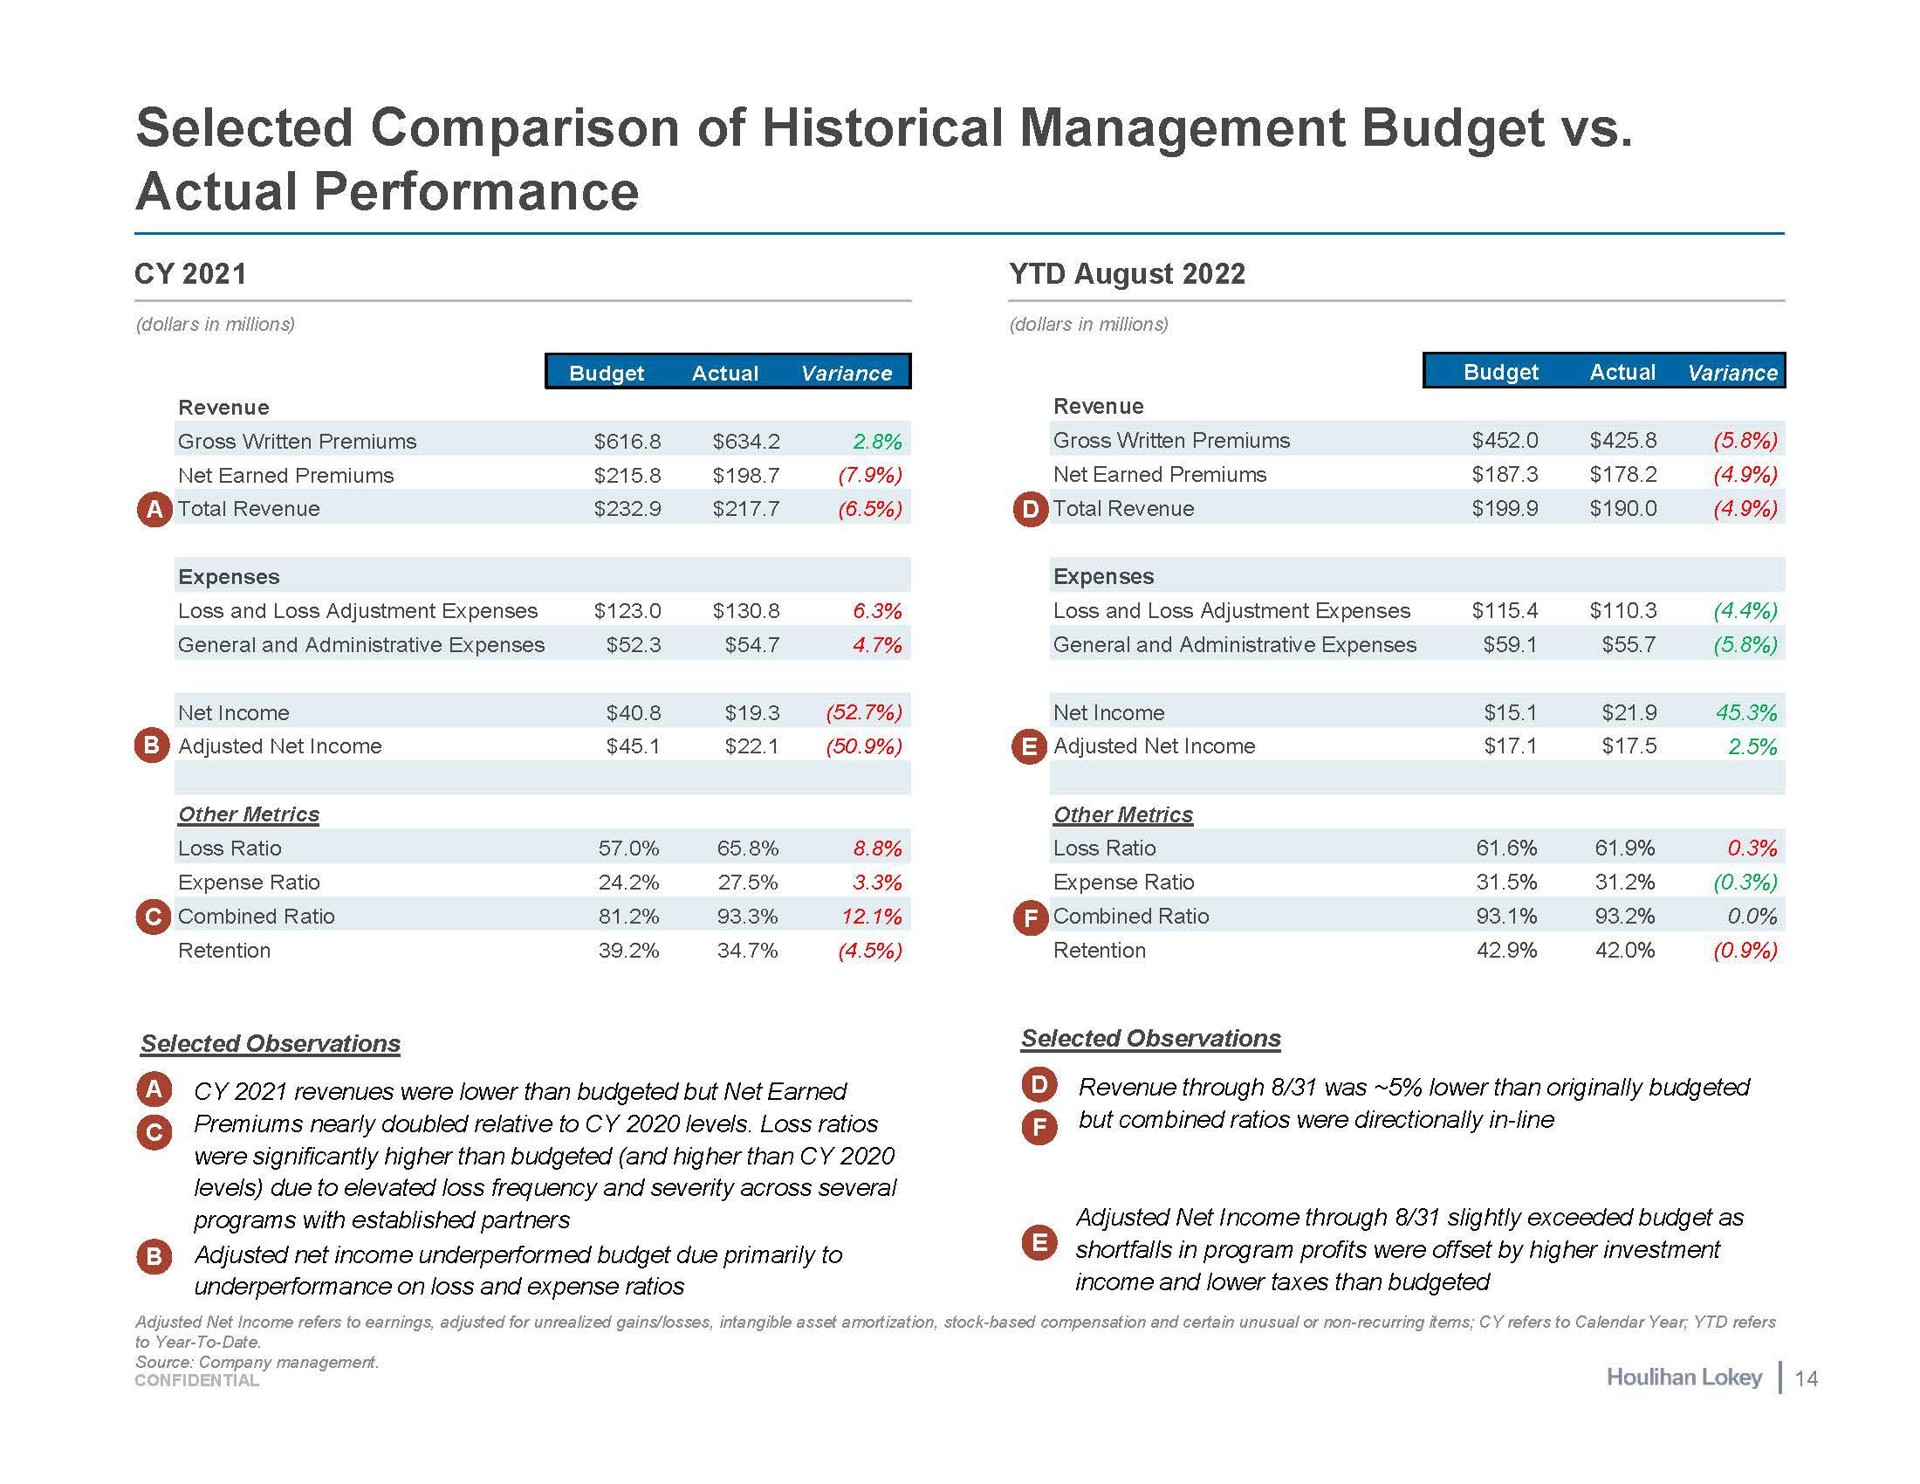 selected comparison of historical management budget actual performance net income net income combined ratio combined ratio revenues were lower than budgeted but net earned revenue through was lower than originally budgeted | Houlihan Lokey